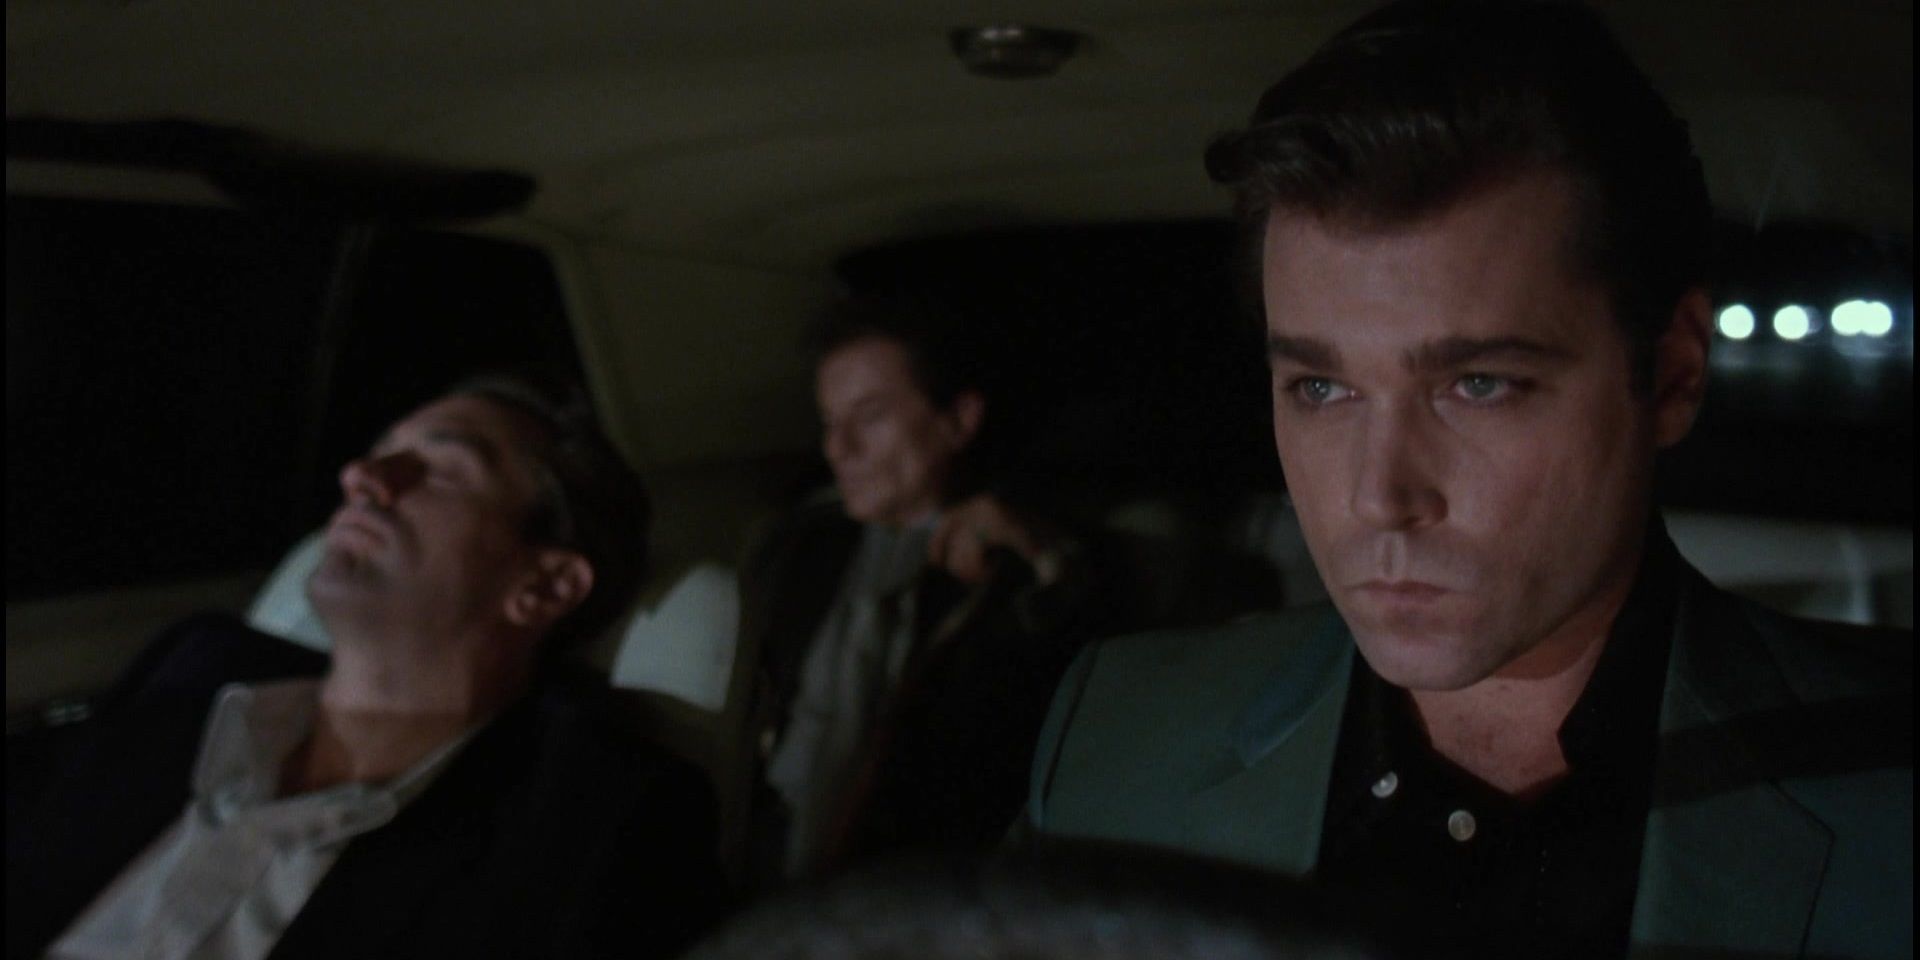 5 Ways Goodfellas Is The Best Gangster Movie (& Its 5 Closest Contenders)